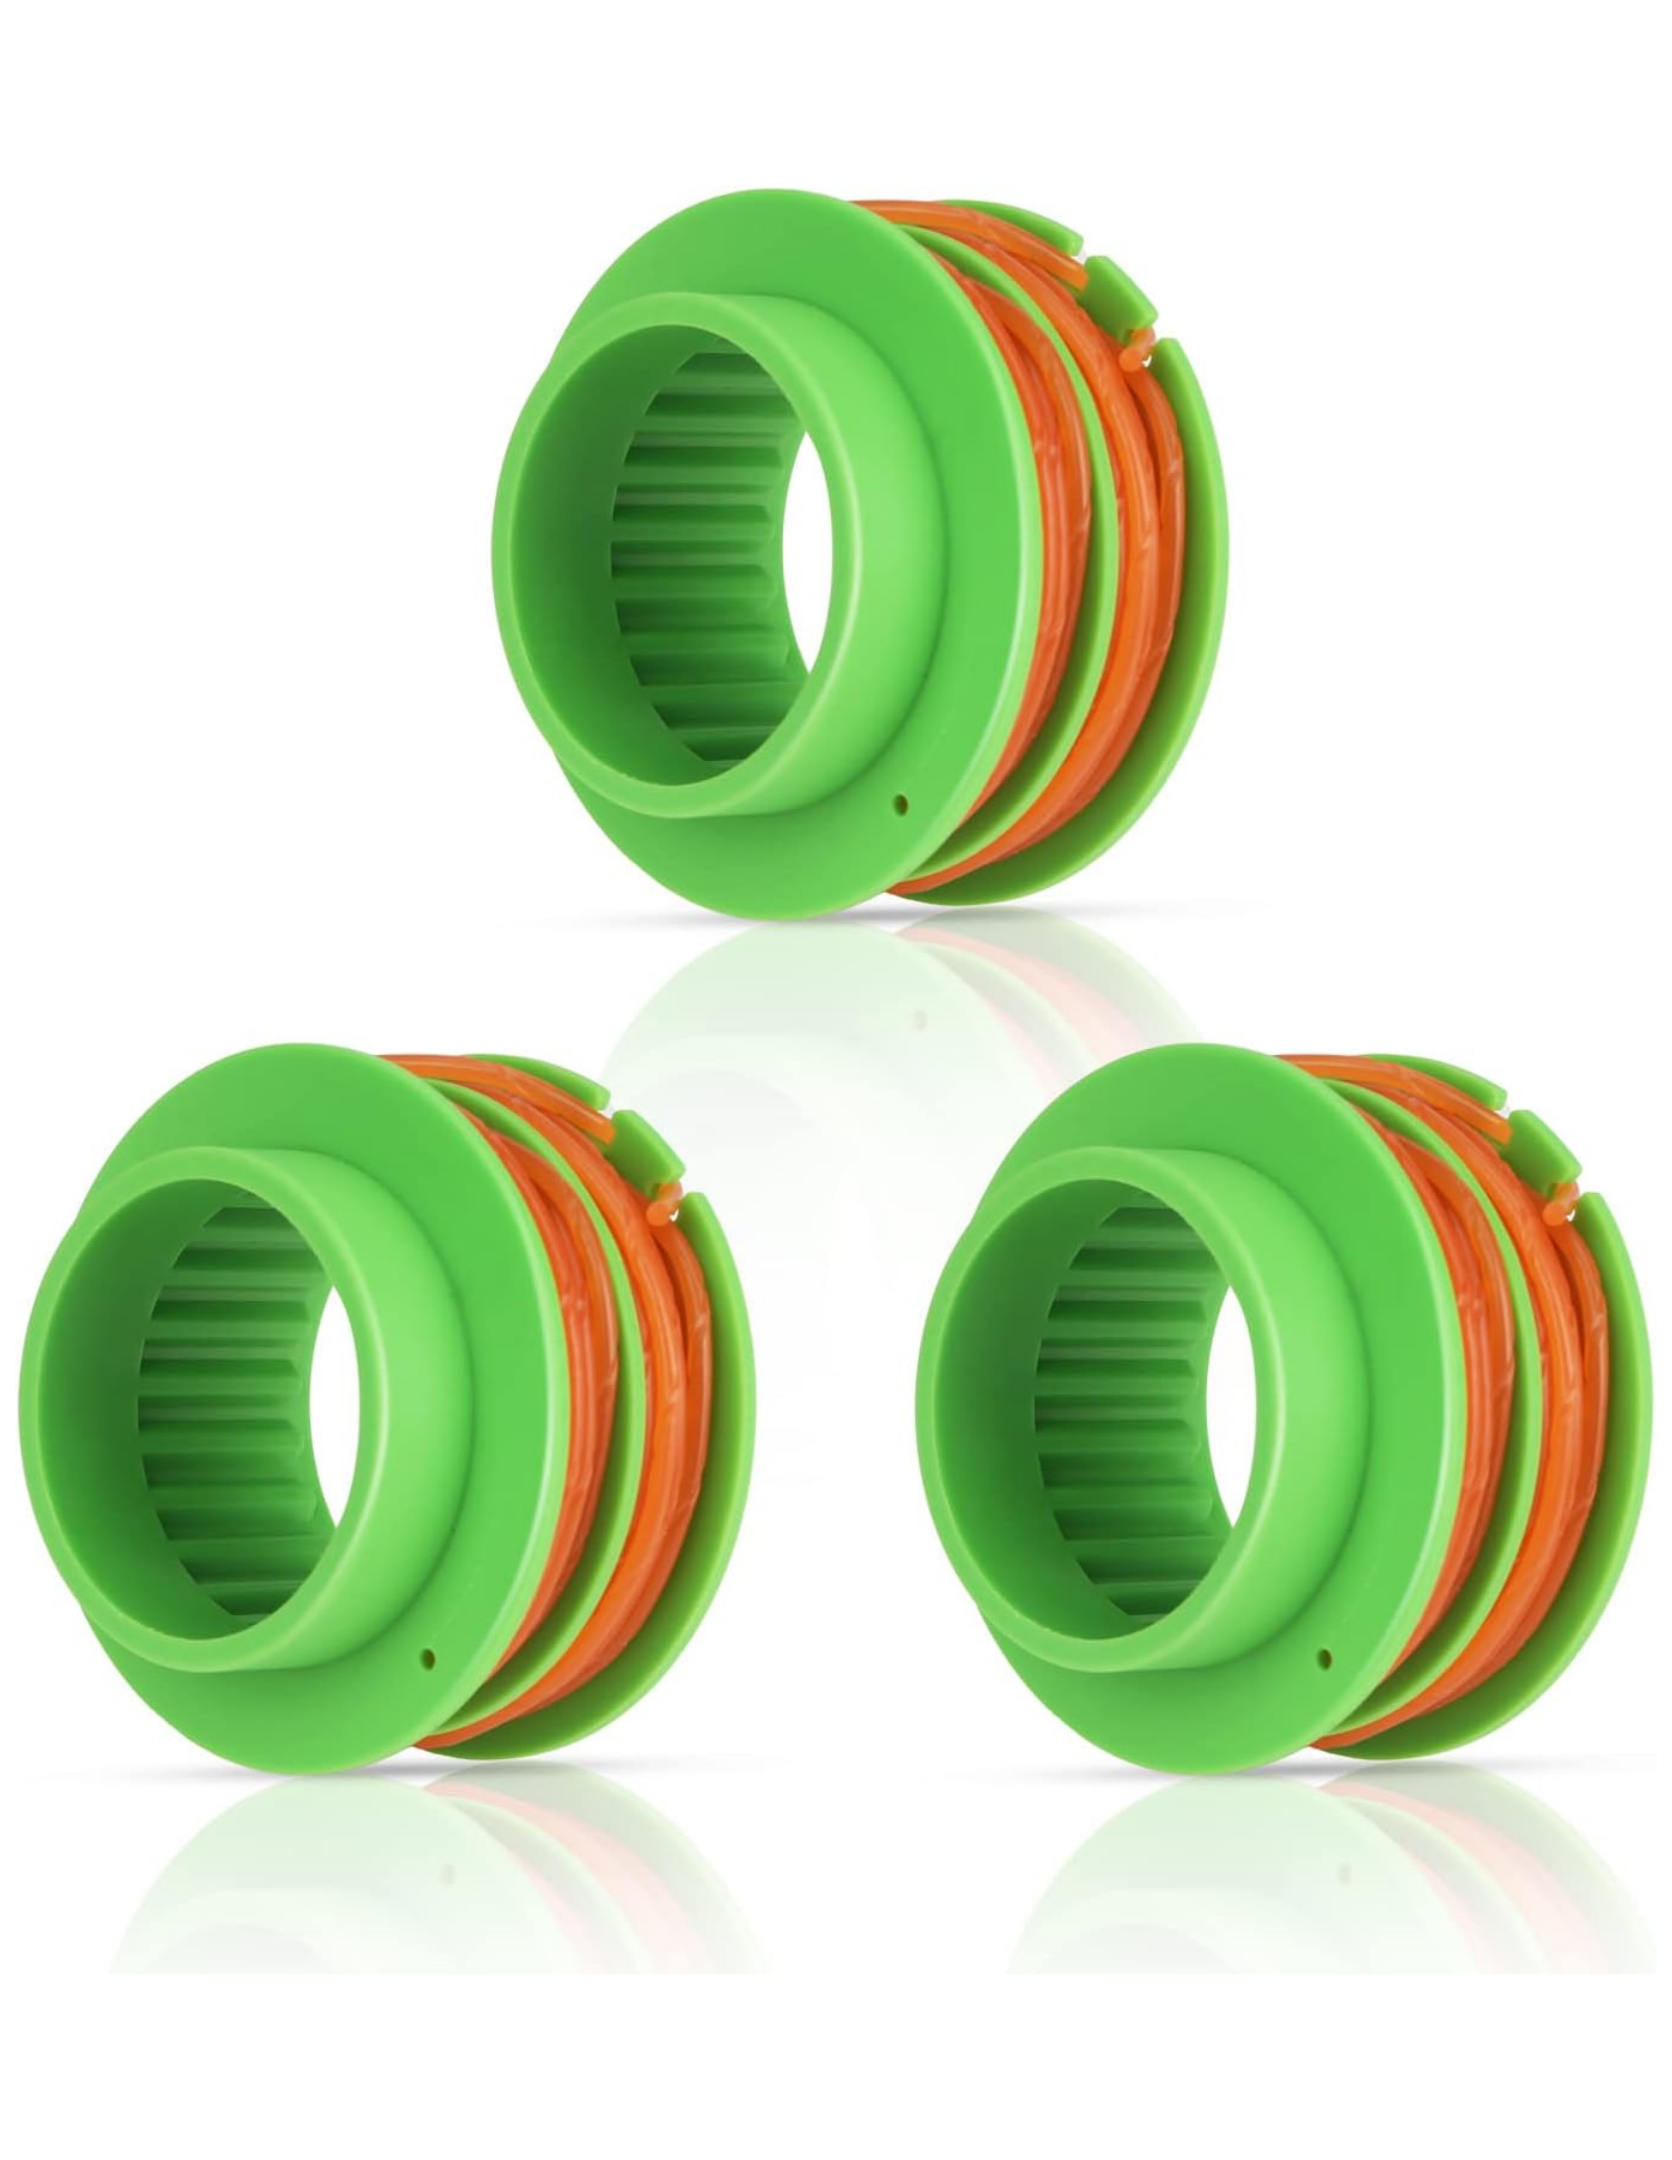 THTEN AS1300 String Trimmer Spool Compatible with EGO 15inch ST1500 ST1500-S 0.095" Weed Eater Auto-Feed Twist Dual Line (3 Pack)